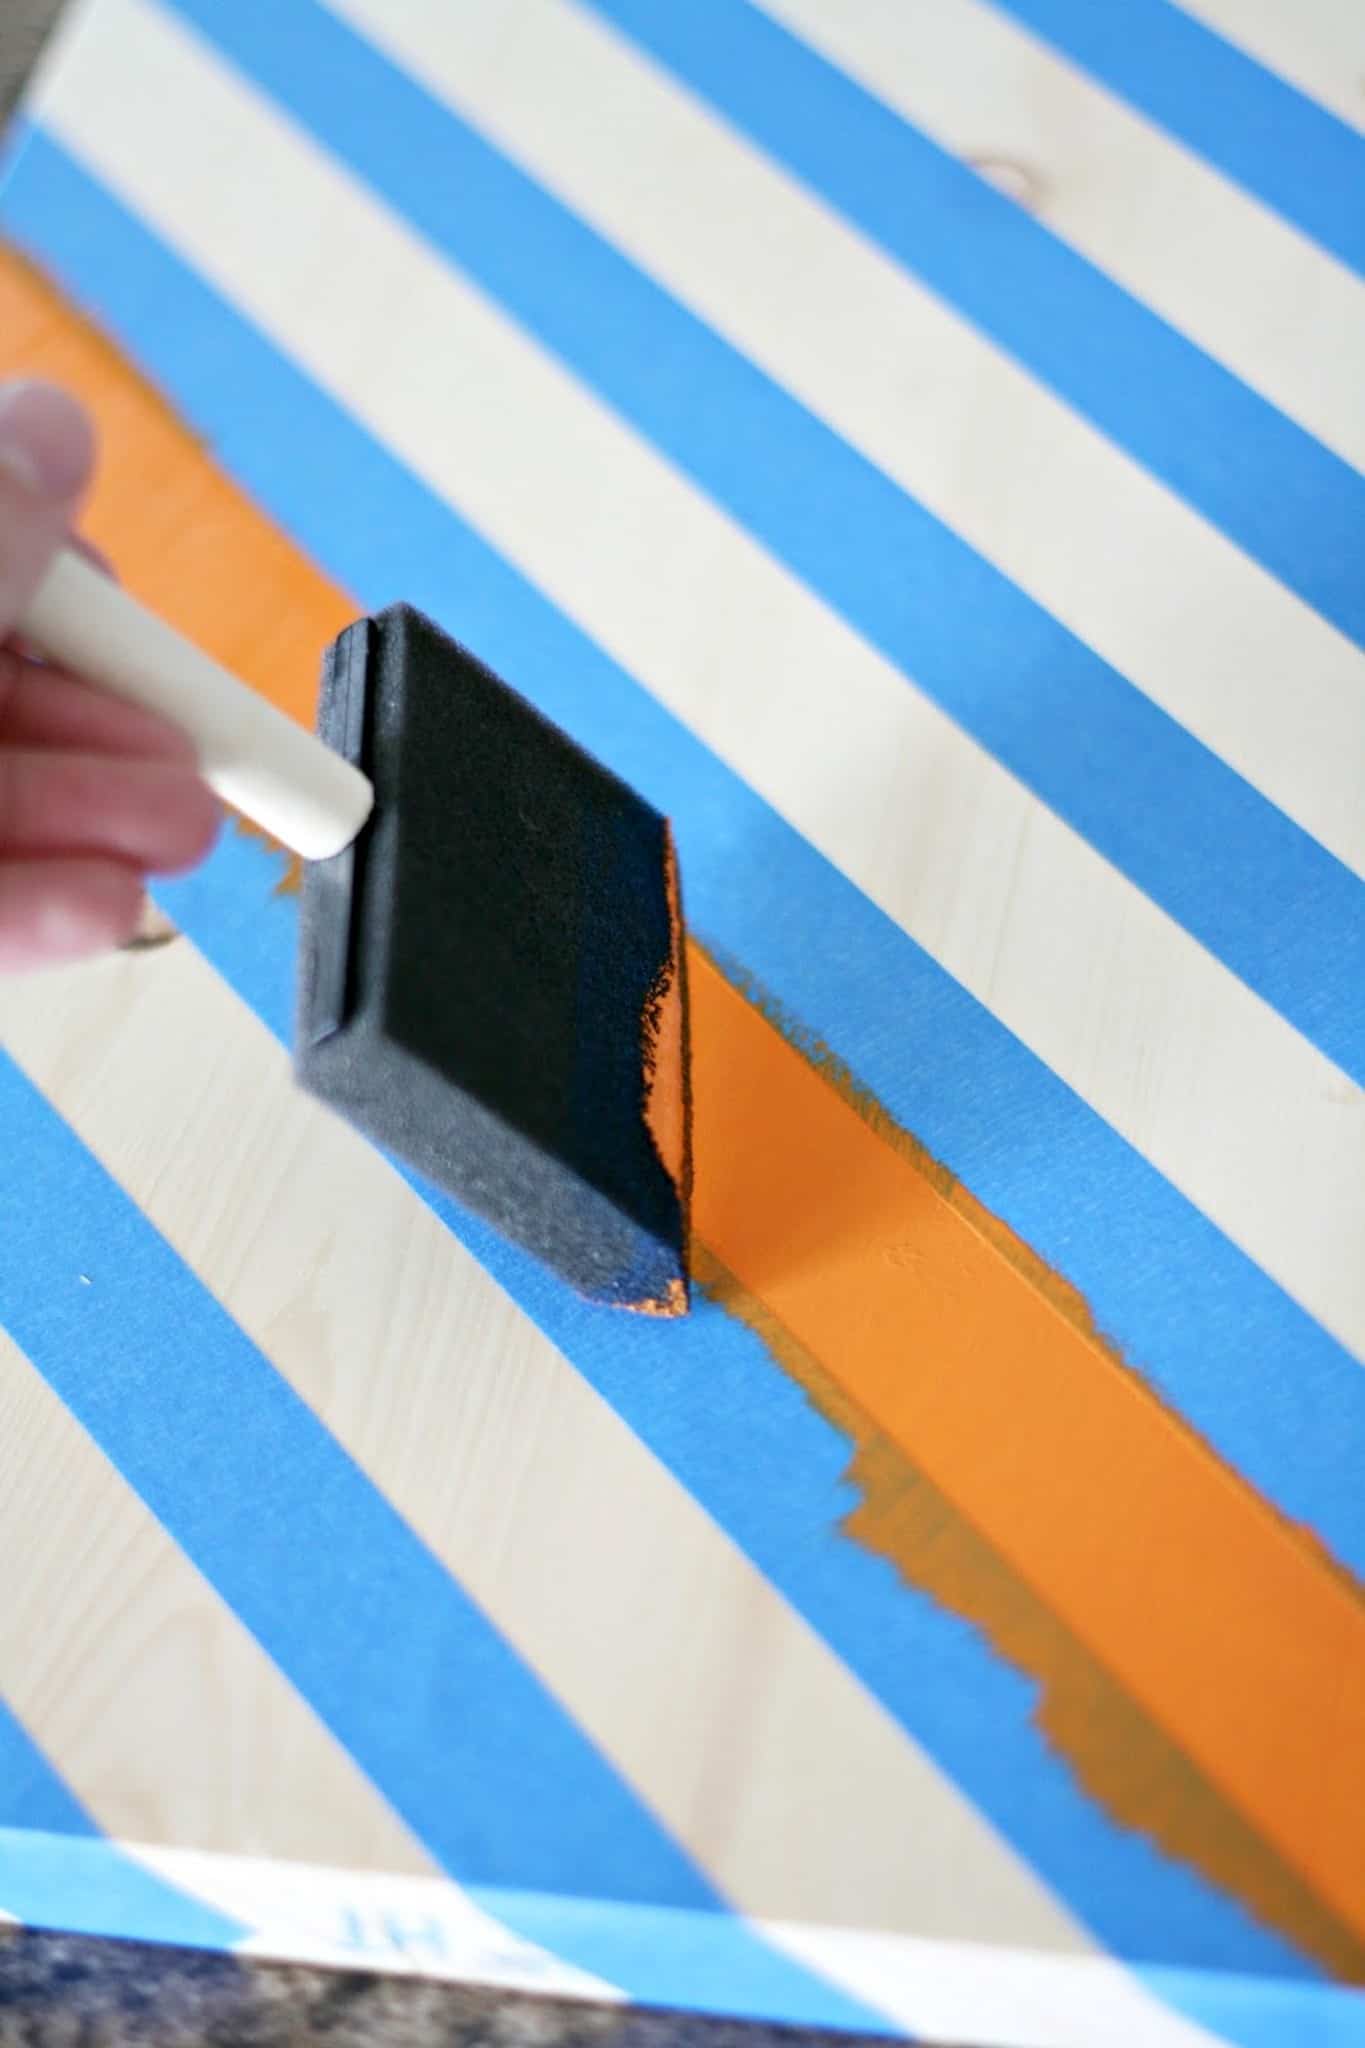 Using a paintbrush to apply orange paint between two lines of painter's tape